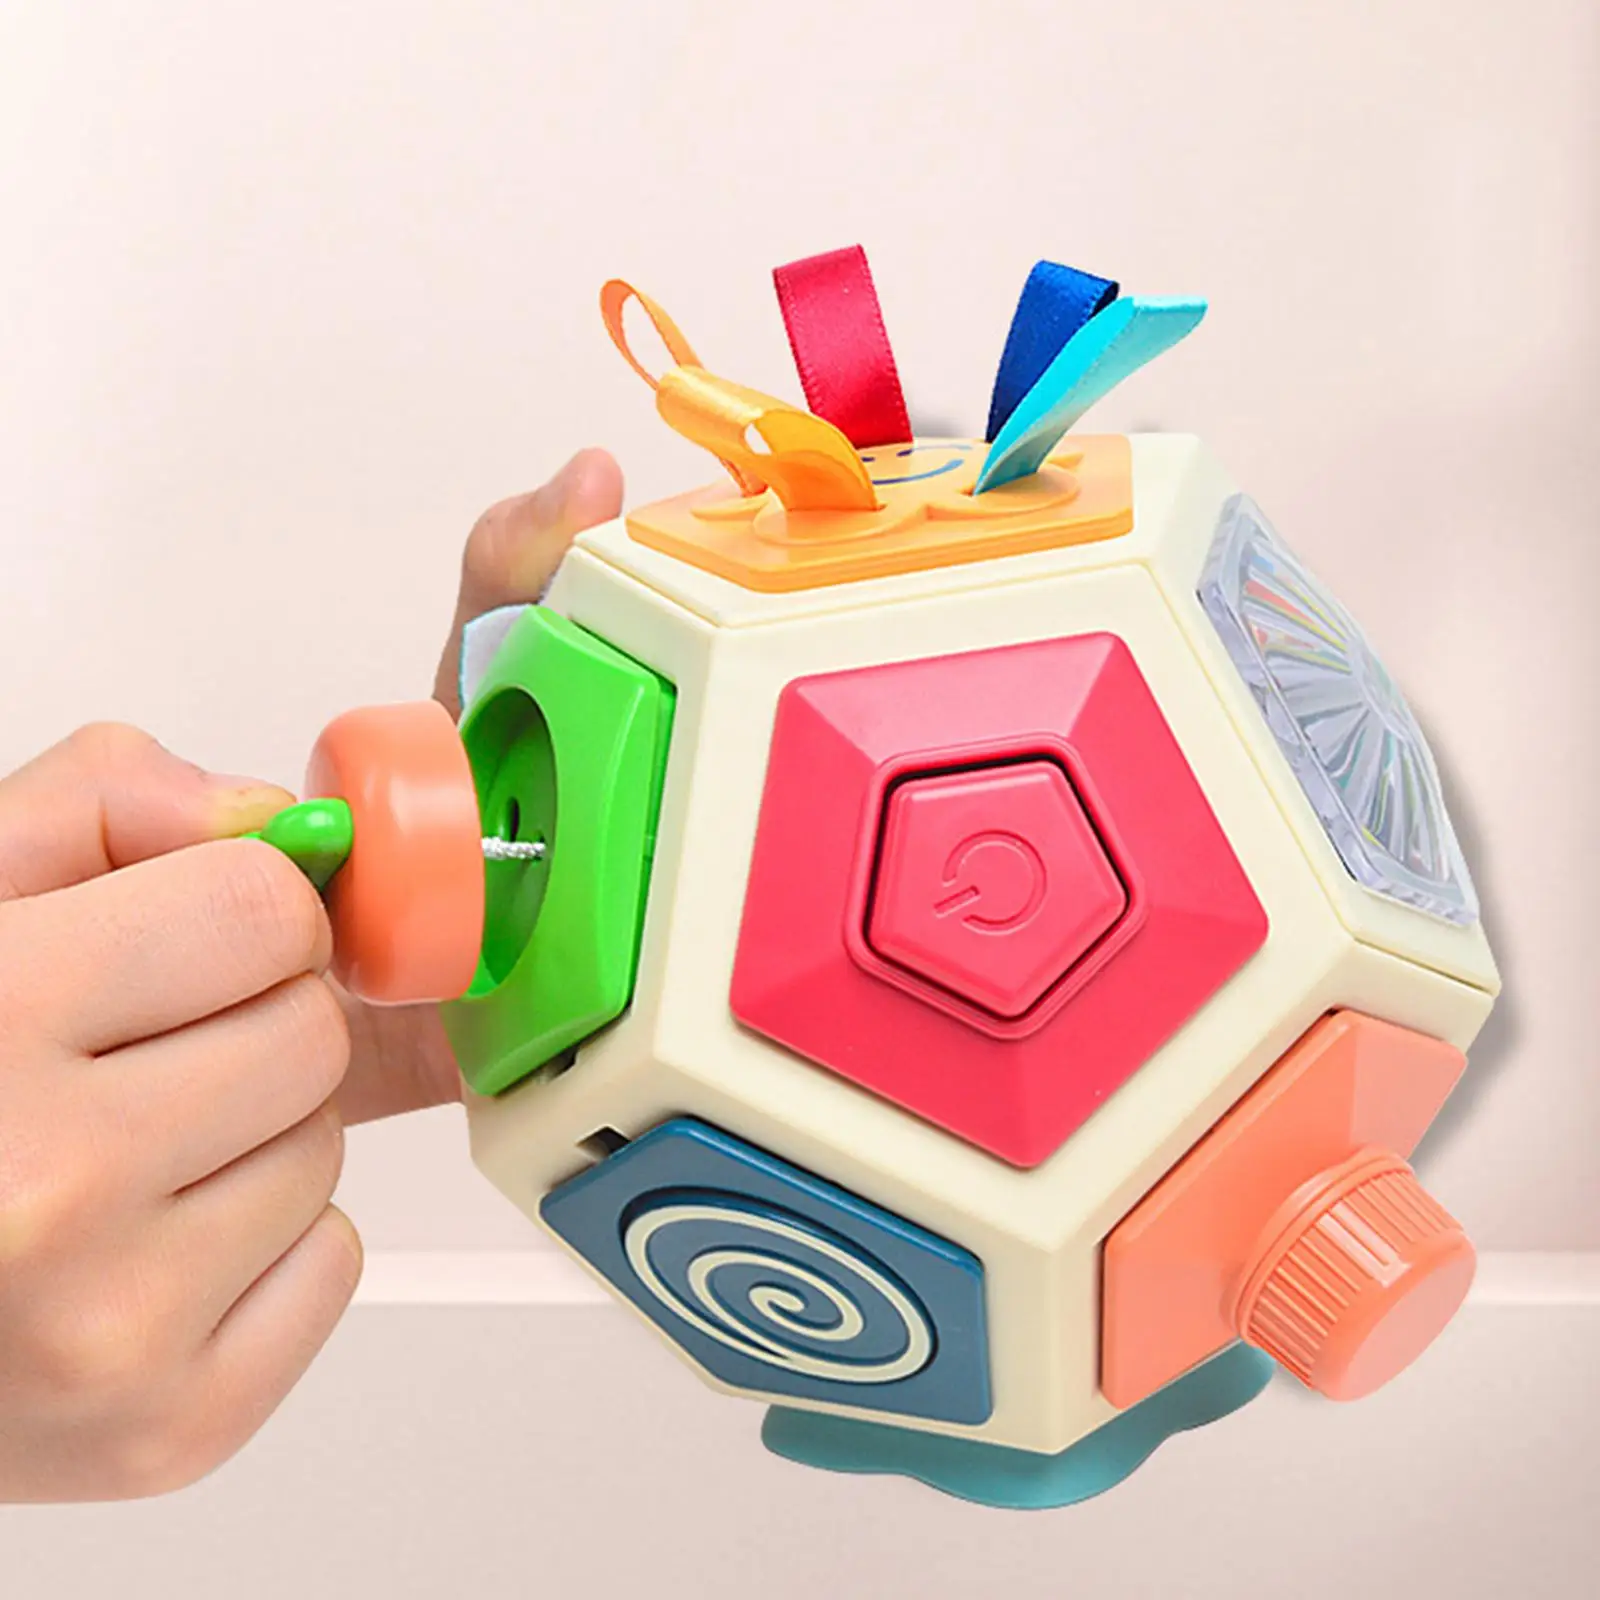 Baby Busy Ball Sensory Toy Portable Busy Hand Grasping Ball for Baby Kids